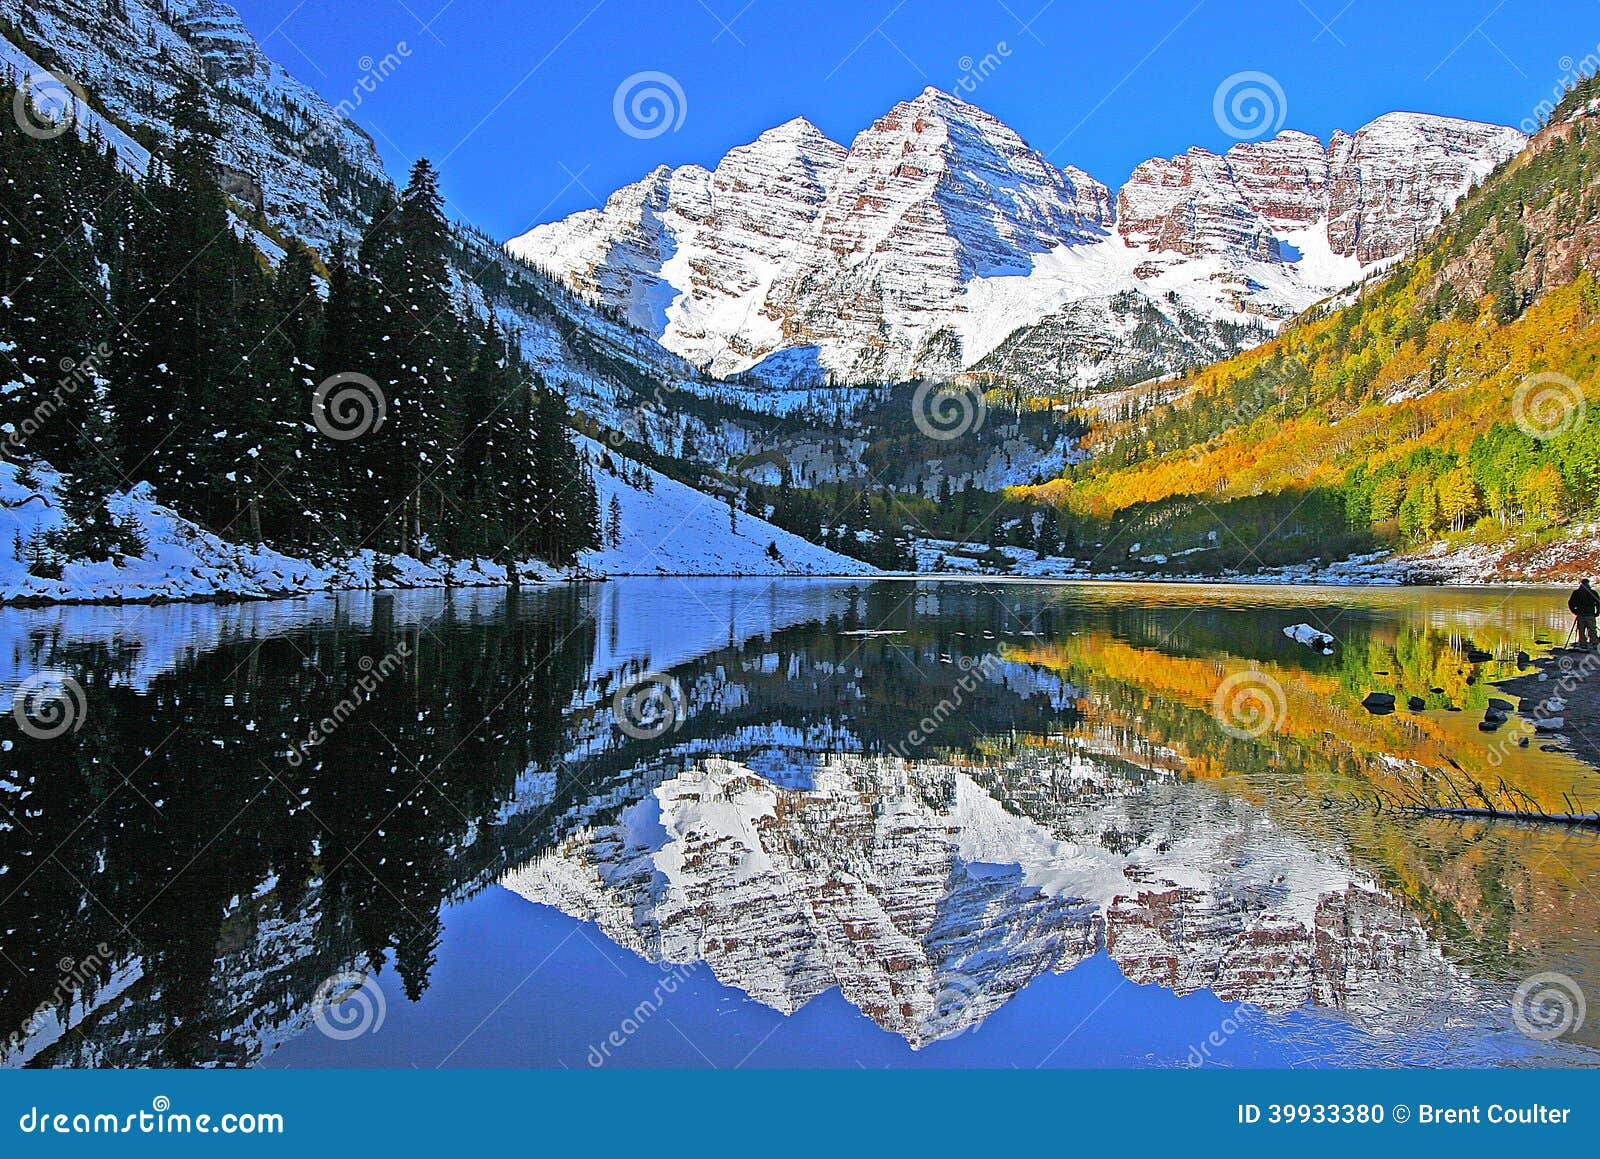 a colorado autumn at the maroon bells